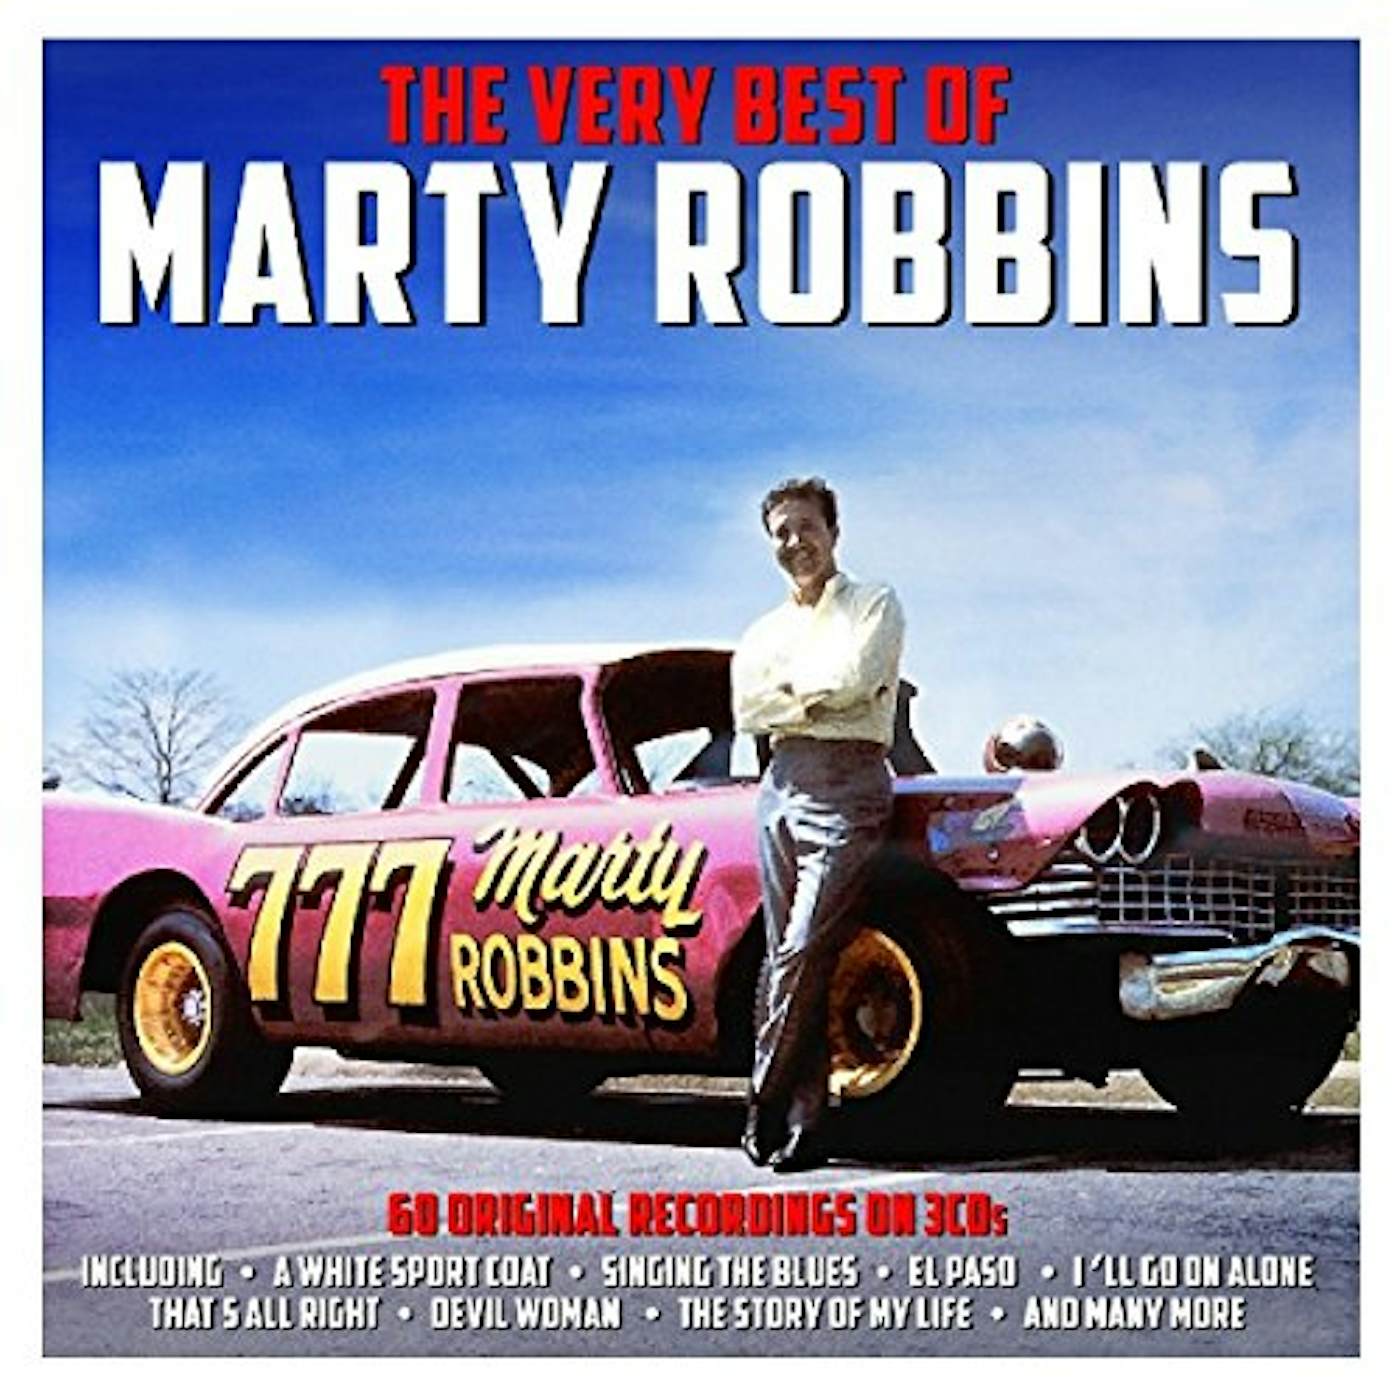 Marty Robbins VERY BEST OF CD